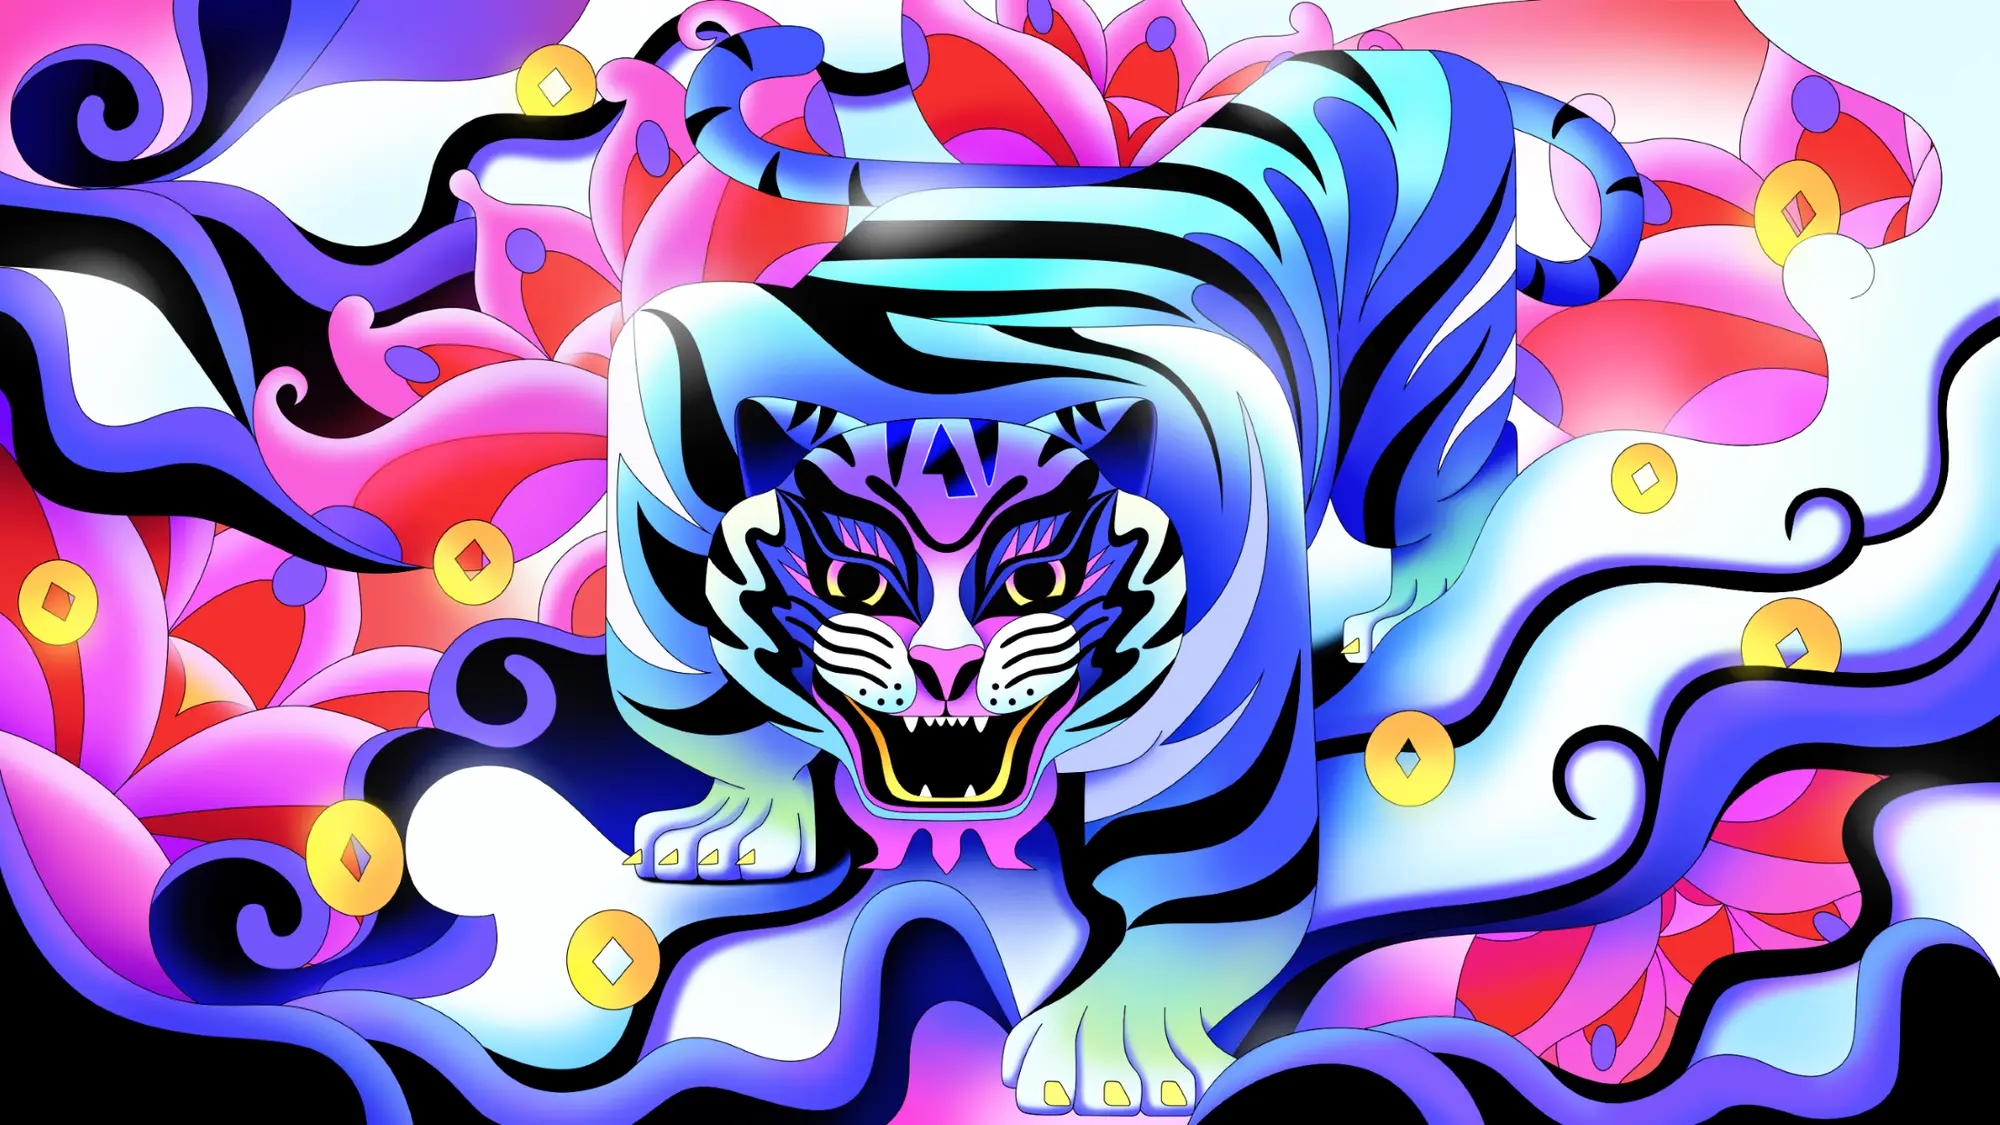 Artwork by Flatwhite Motion: A graphic design of a cartoon Tiger that is growling and stalking forward. The Tiger is surrounded by a design of red, pink, purple and blue swirls. 